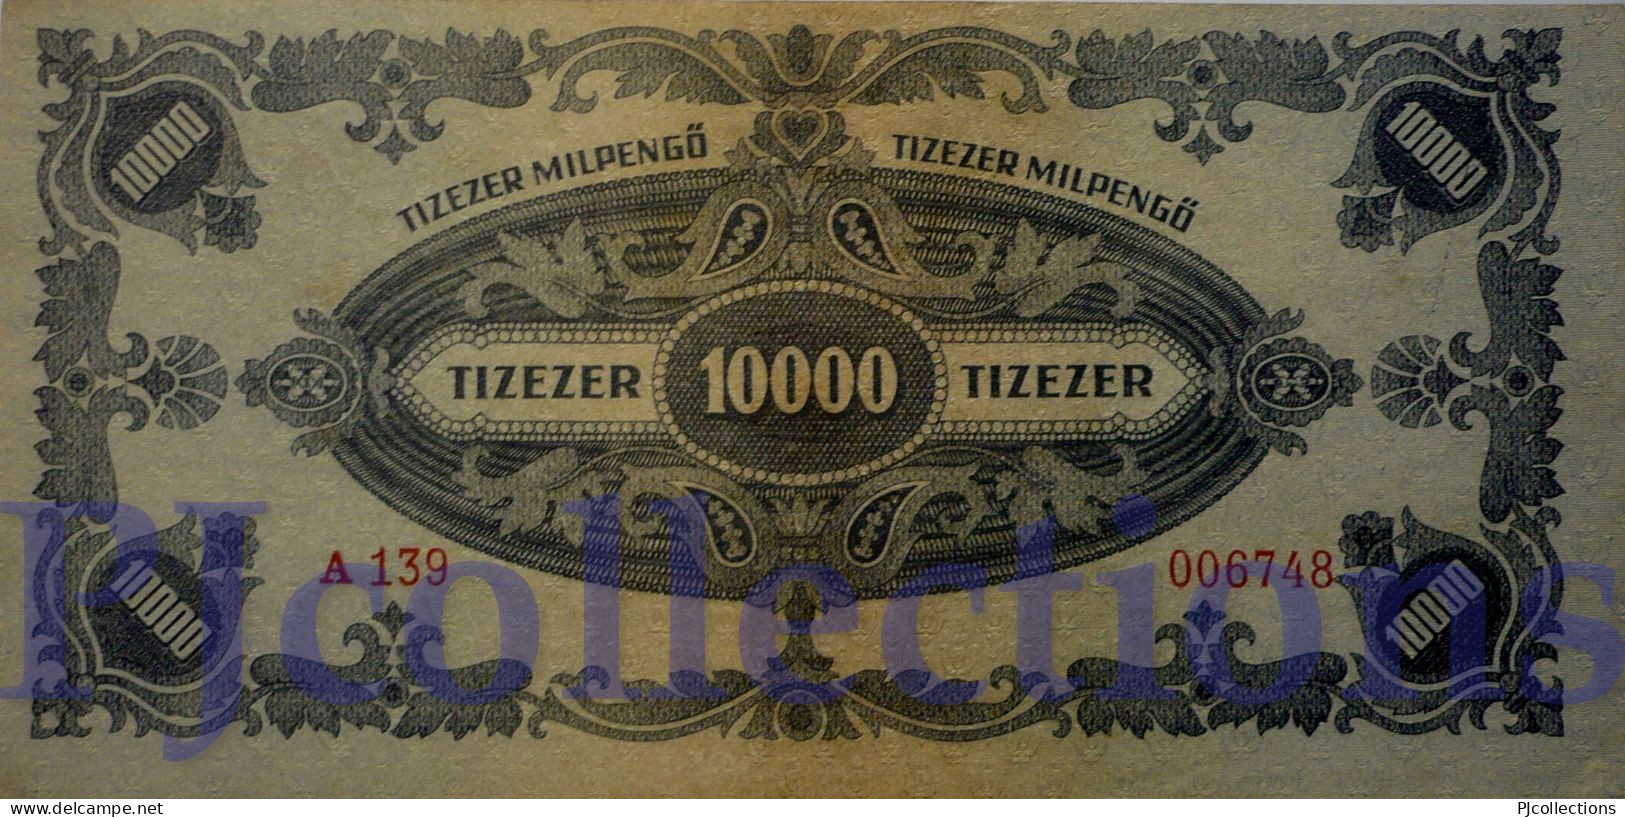 HUNGARY 10000 MILPENGO 1946 PICK 126 AU/UNC LOW SERIAL NUMBER "006748" - Hongrie